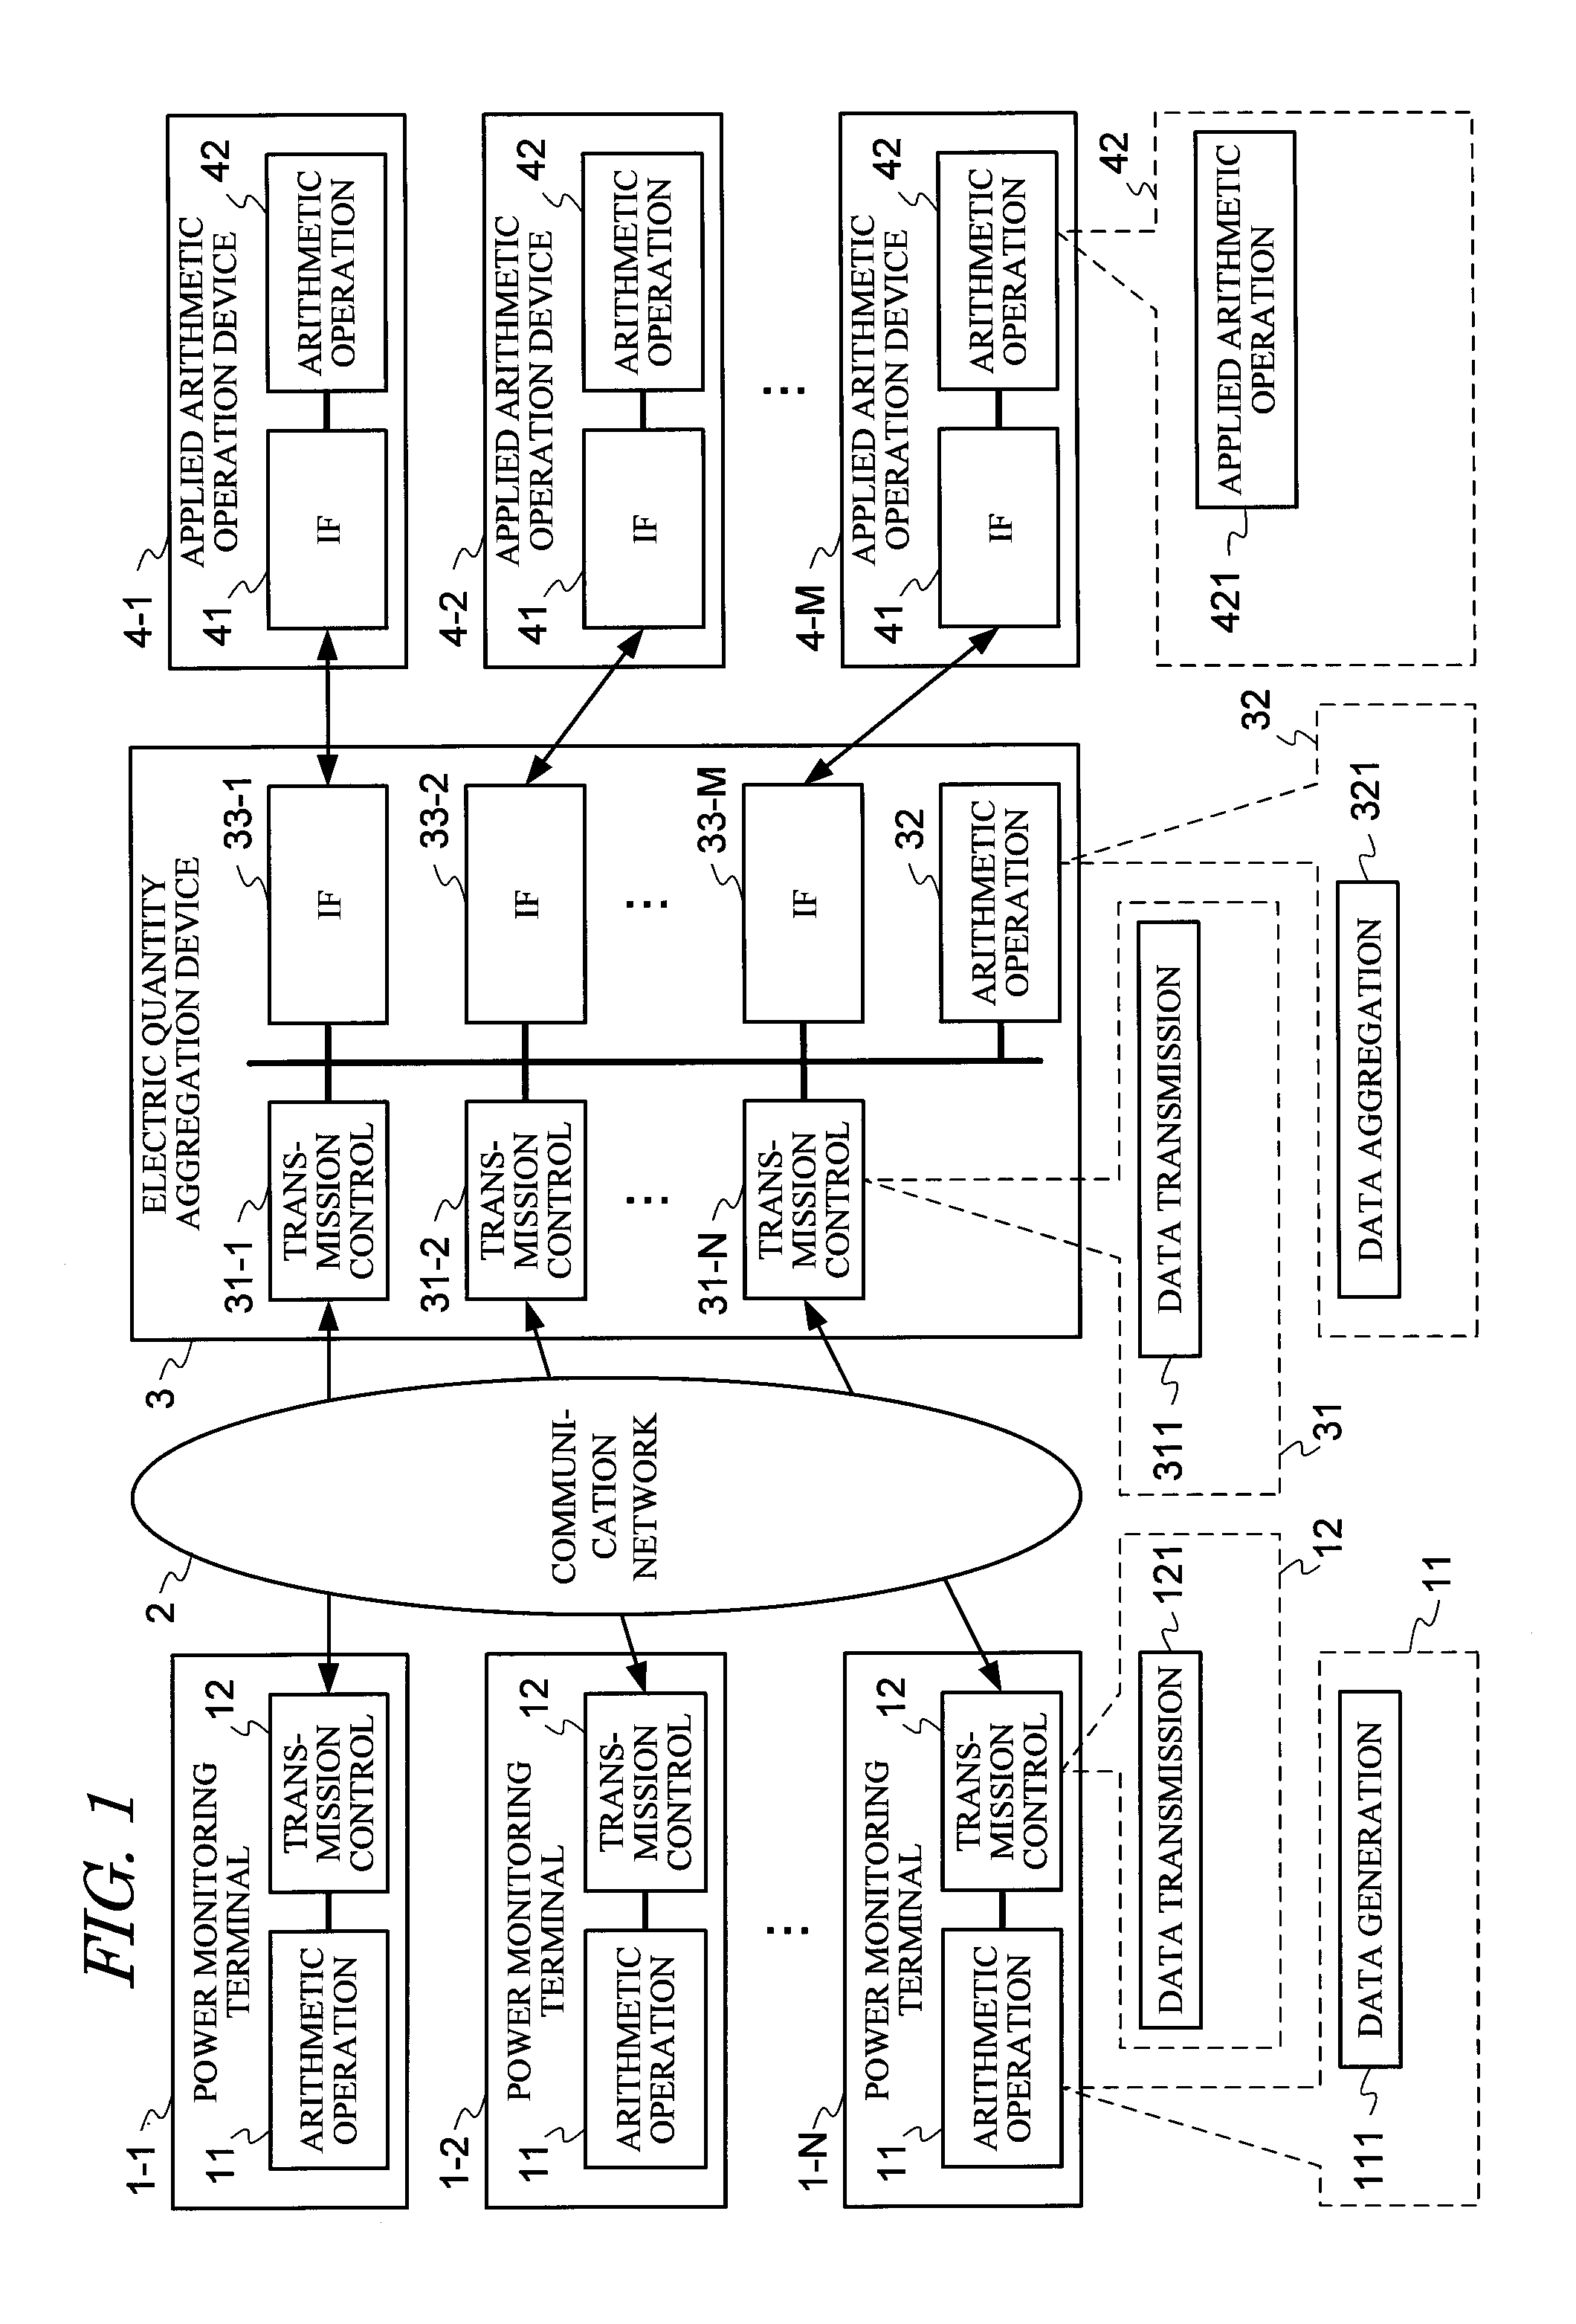 Wide area protection control measurement system and method